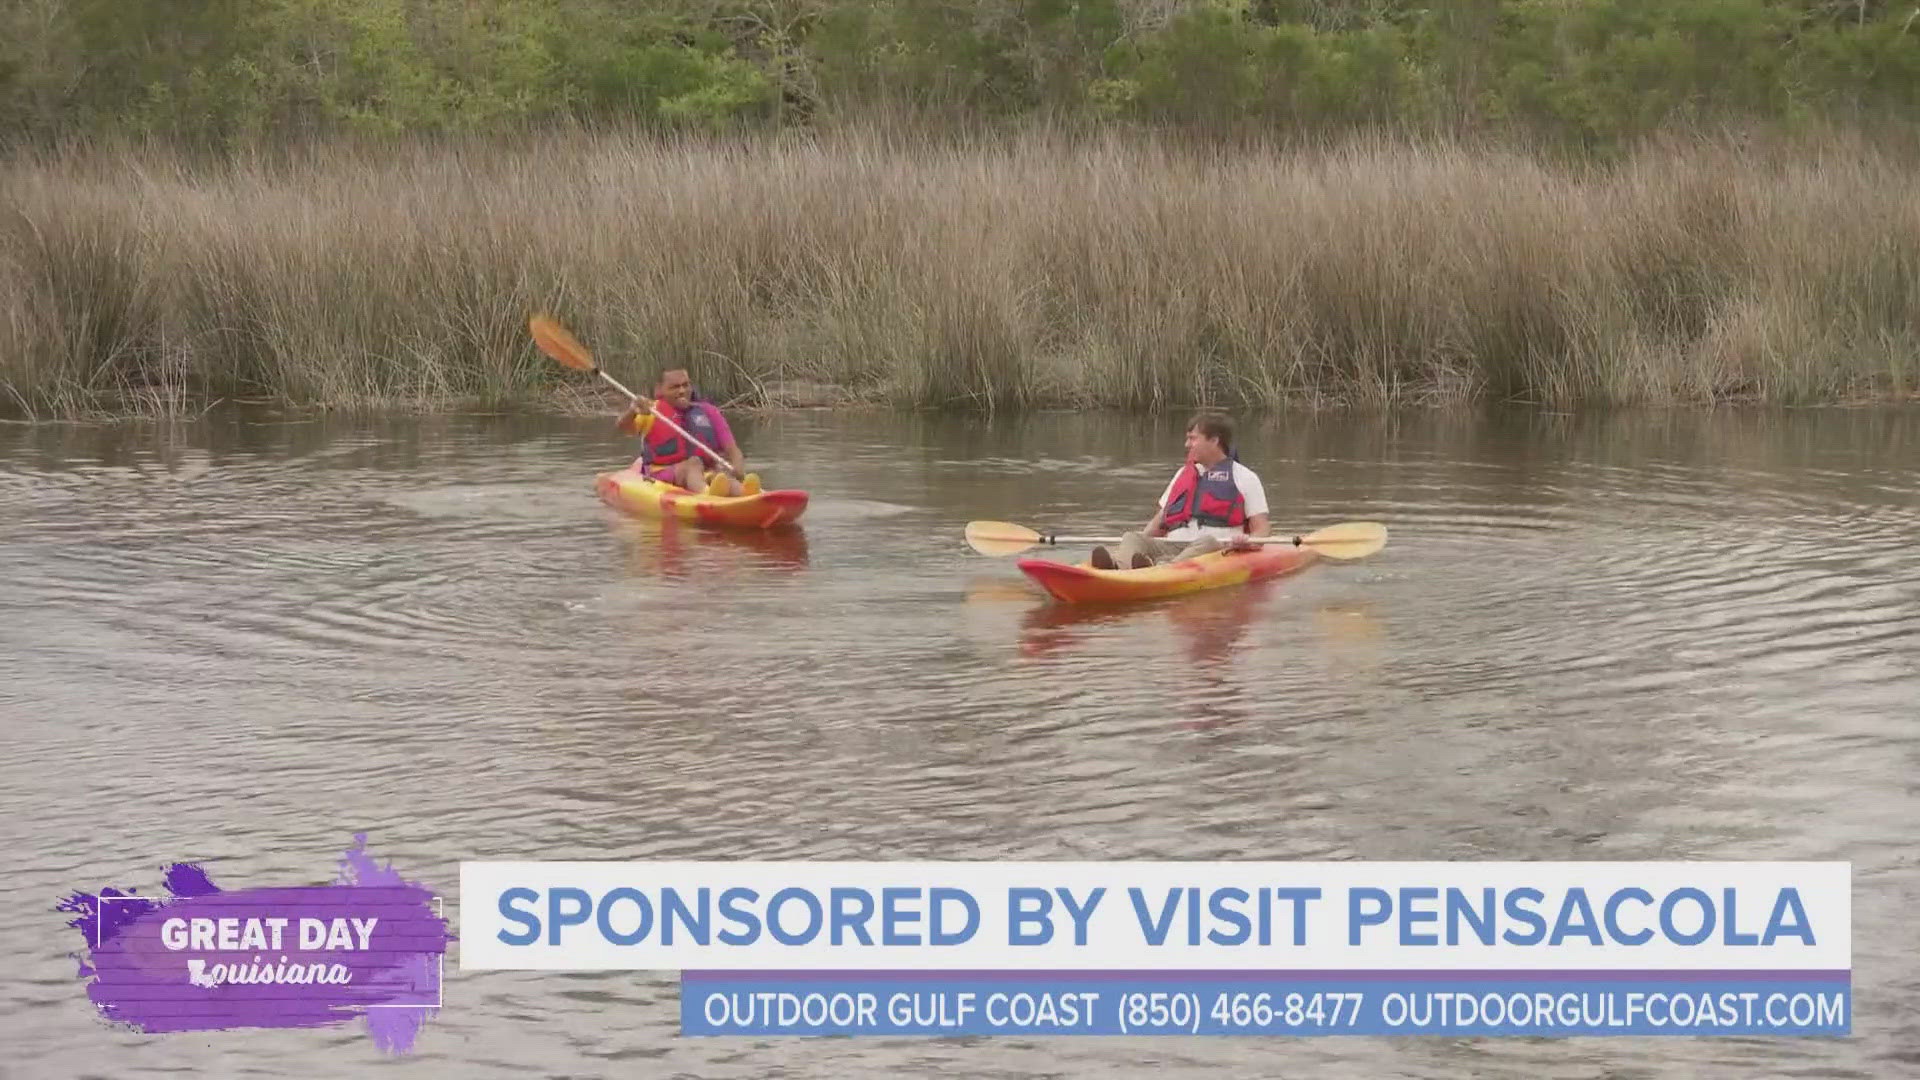 Just a short drive from Pensacola, Florida is Perdido Key! Malik learned more about the area and then, went kayaking at Big Lagoon State Park with Outdoor Gulf Coast